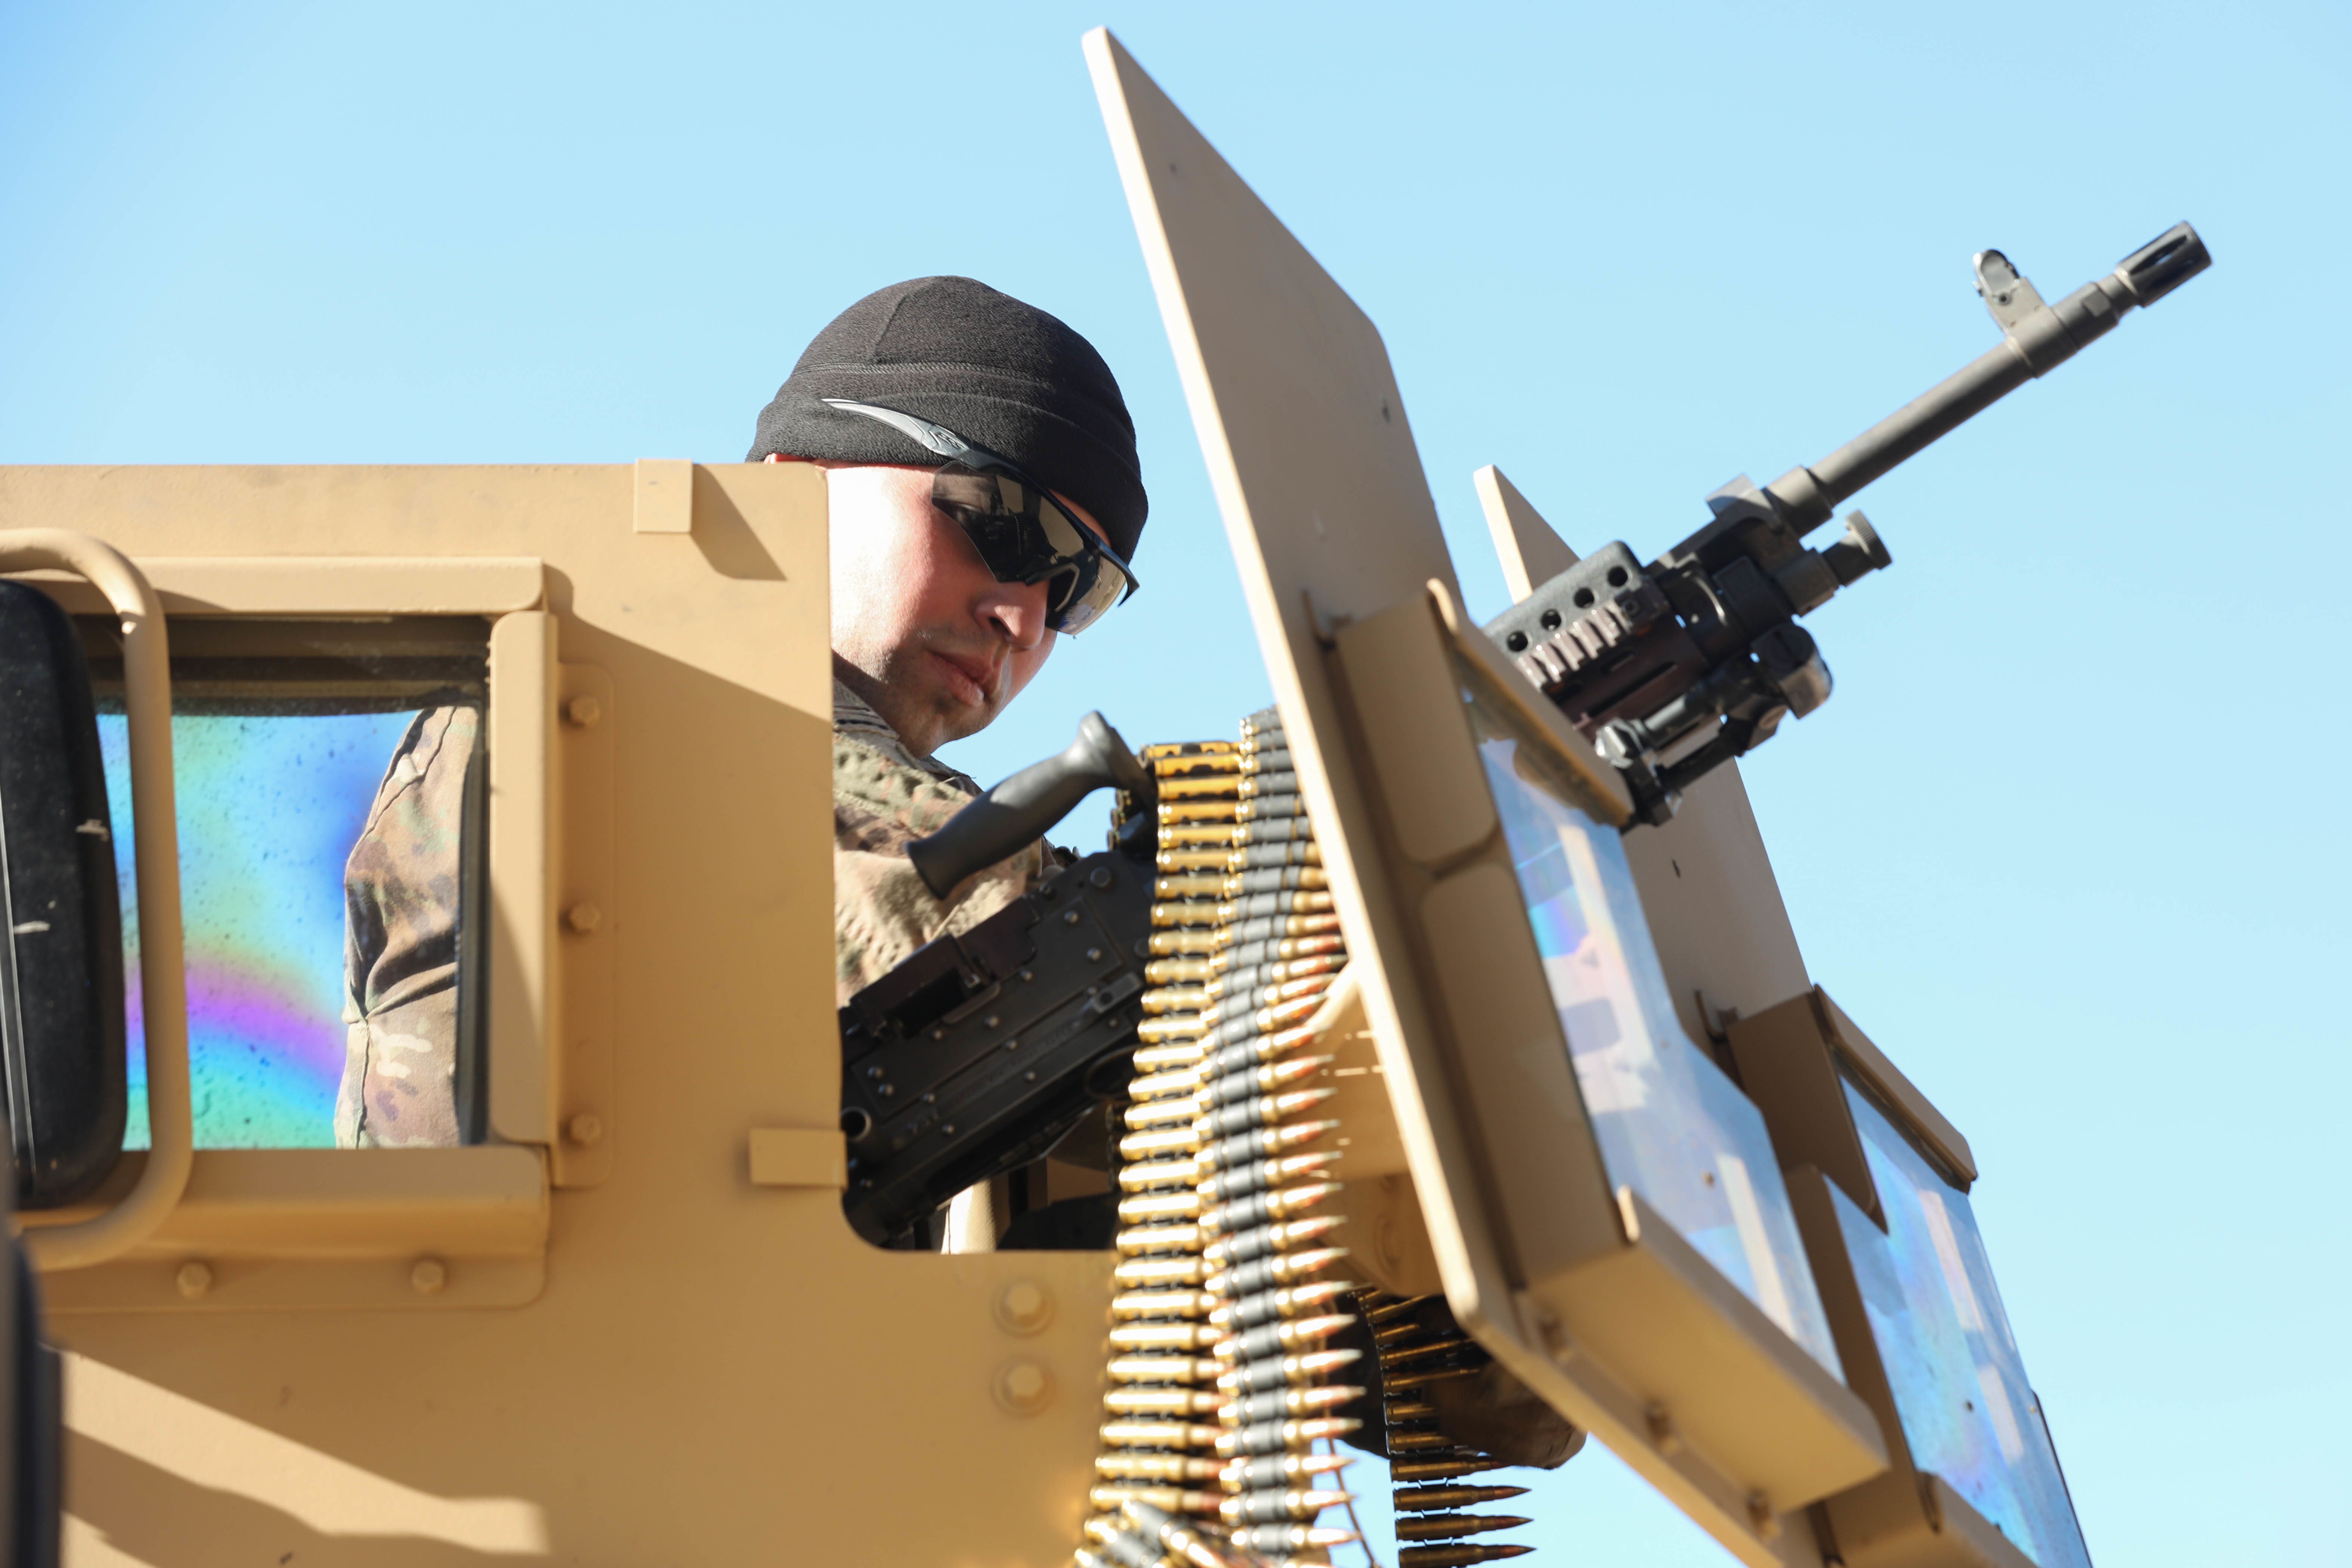 Sgt. Eric Roman, farrier with the Fort Carson Mounted Color Guard assigned to Headquarters and Support Company, Headquarters and Headquarters Battalion, 4th Infantry Division, loads ammunition into his crew's vehicle's overhead turret on Nov. 6, 2019, at Fort Carson. Roman controlled the overhead turret during HSC's gunnery training and shot pop-up targets as the rest of his team maneuvered the vehicle through the course. (U.S. Army photo by Pfc. Kelsey Simmons